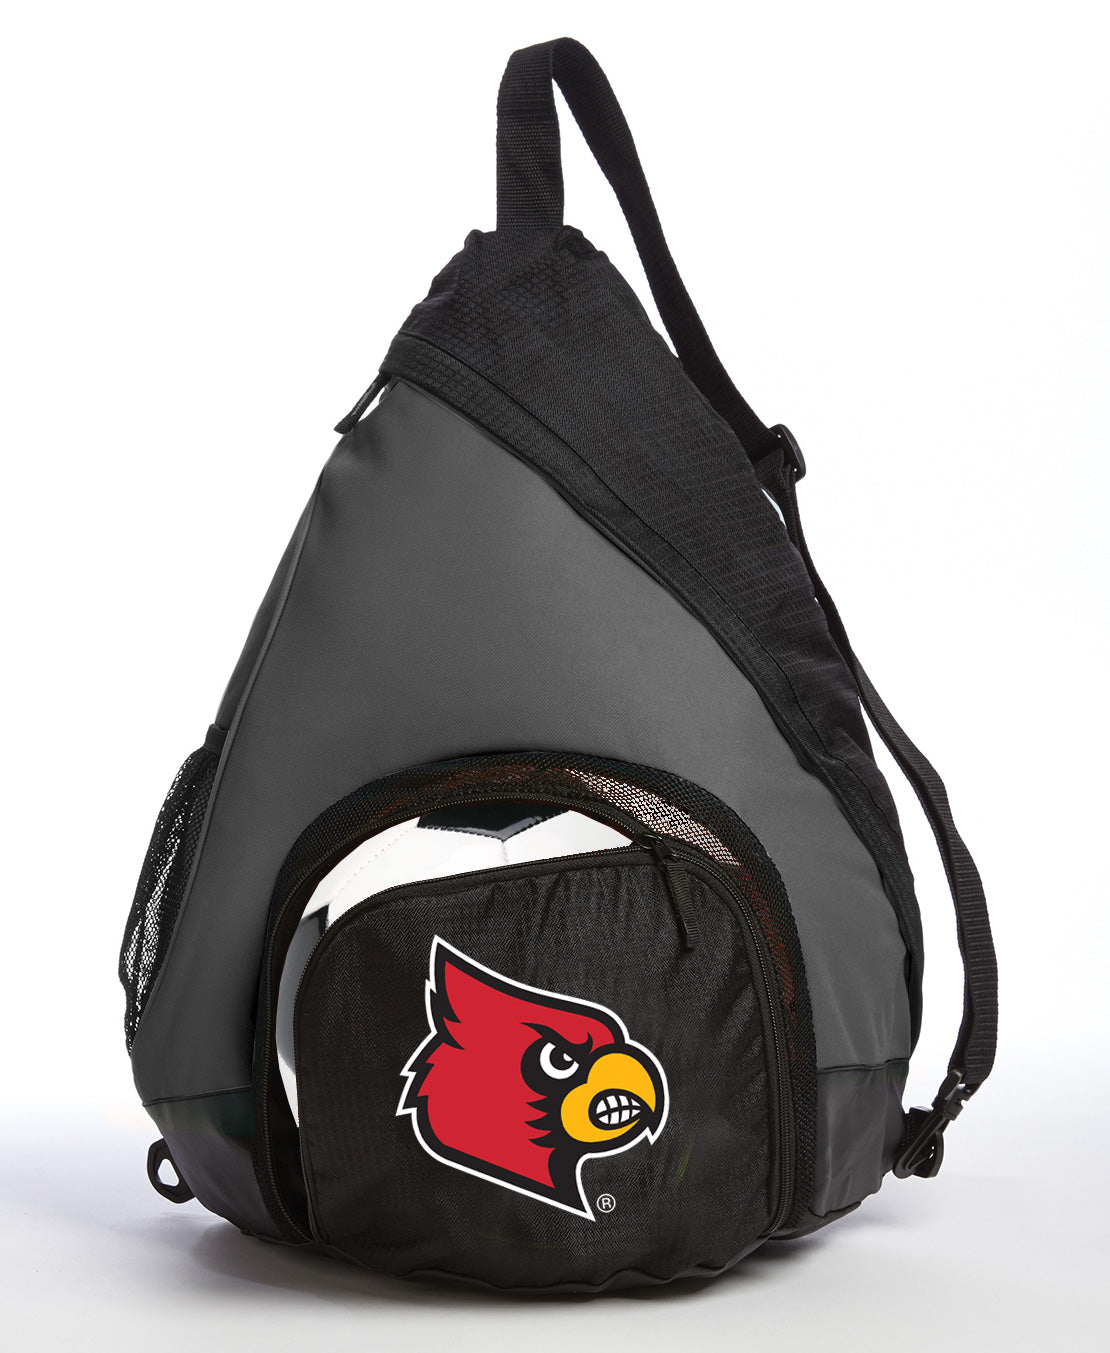 University of Louisville Sling Backpack Louisville Cardinals Bag with Soccer Ball or Volleyball Bag Sports Gear Compartment Practice Bag